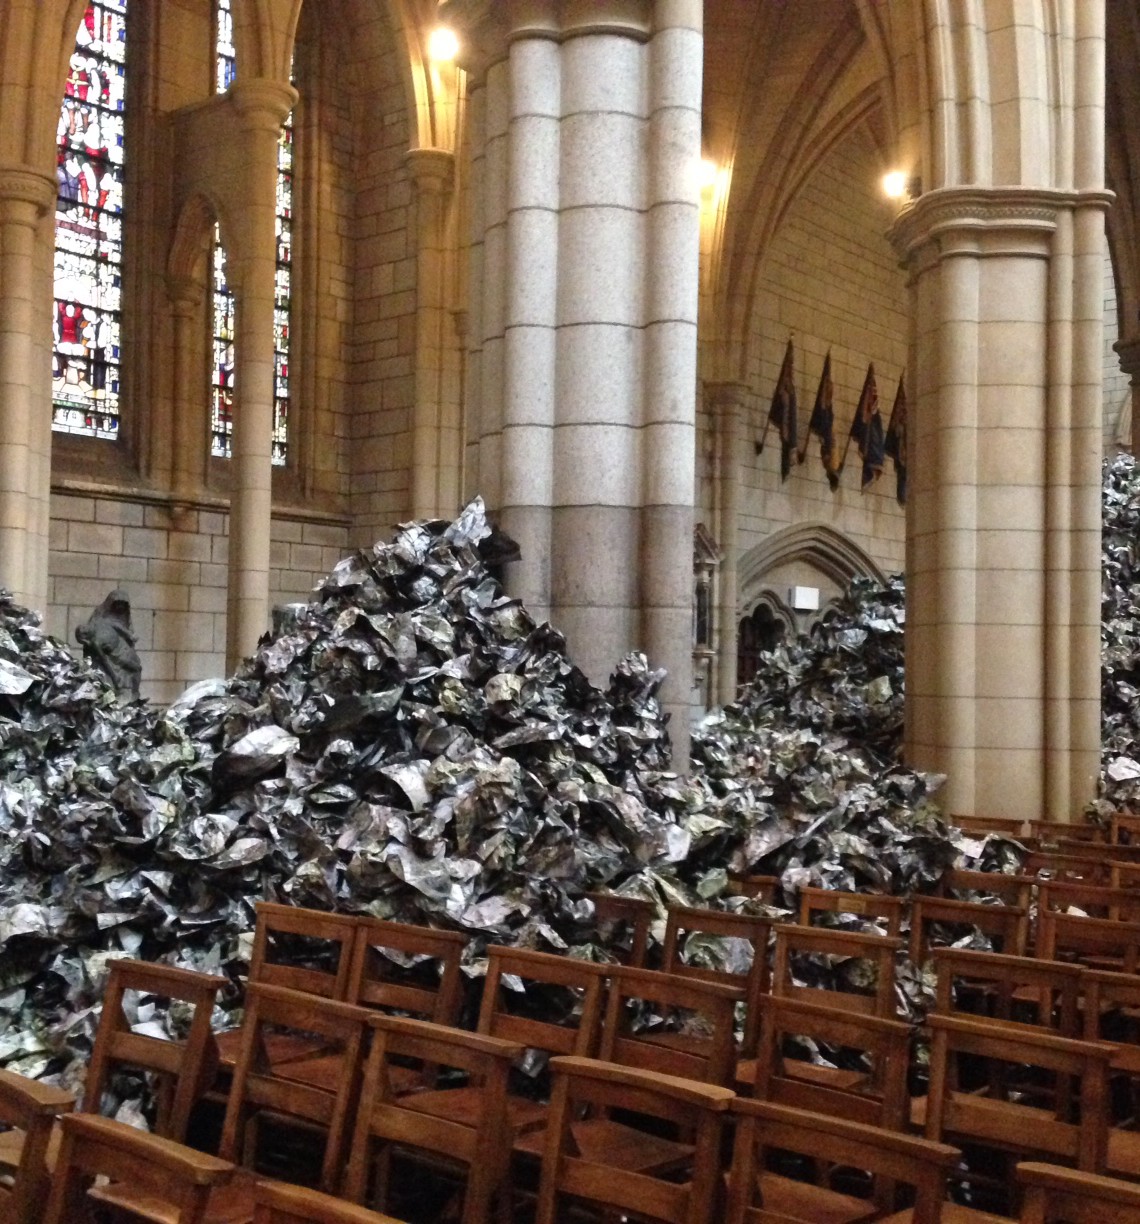 Part of the Imran Qureshi installation in Truro Cathedral